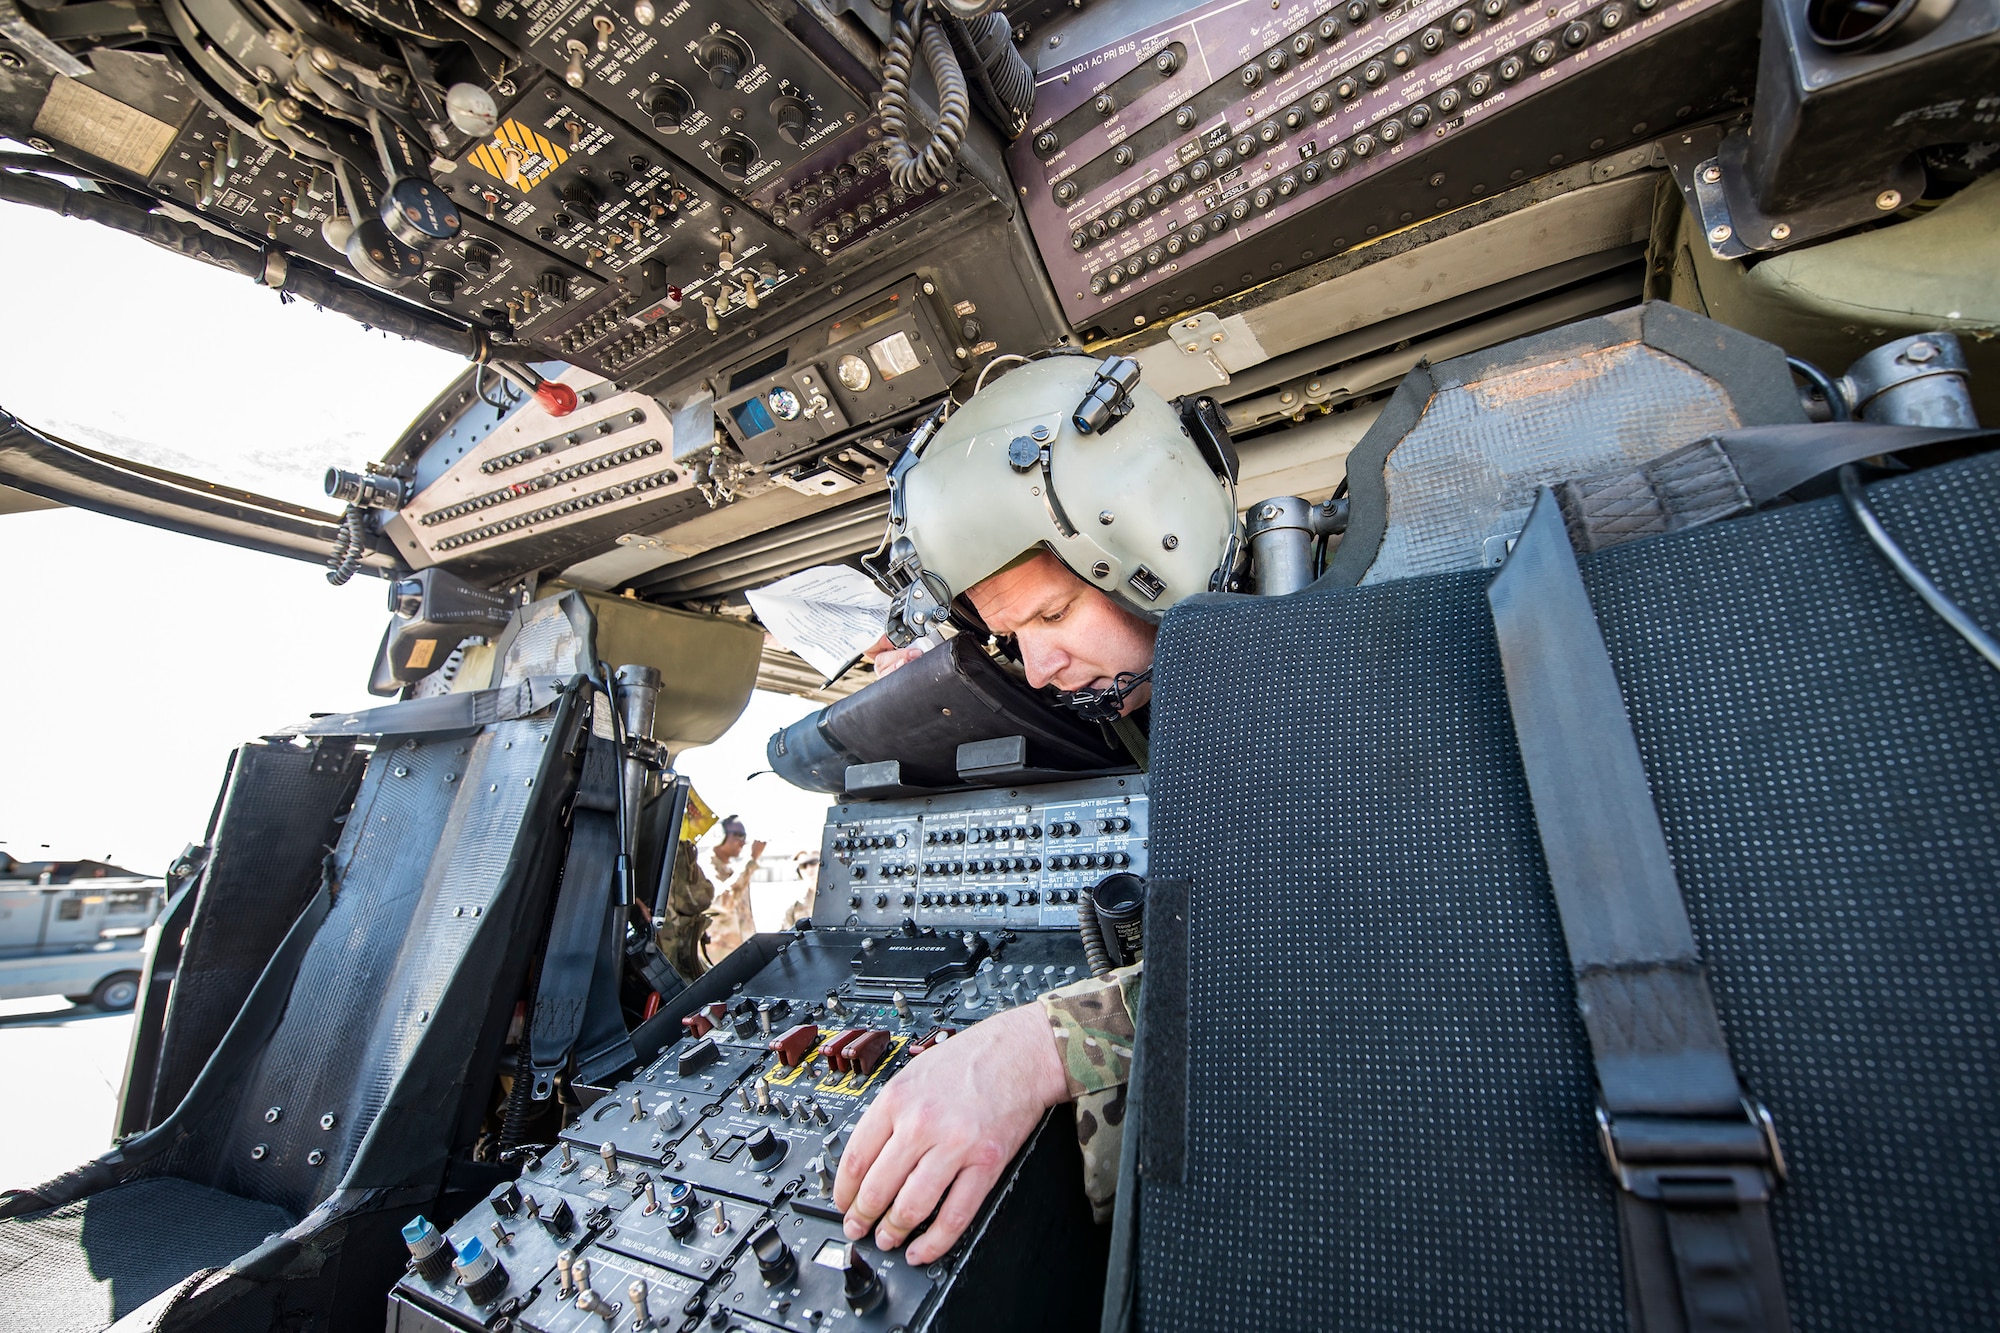 Tech. Sgt. Justin Cole, 41st Rescue Squadron (RQS) special missions aviator, performs an operations check, March 15, 2018, at Moody Air Force Base, Ga. Airmen from the 41st RQS and 723d Aircraft Maintenance Squadron conducted pre-flight checks to ensure that an HH-60G Pave Hawk was fully prepared for a simulated combat search and rescue mission. (U.S. Air Force photo by Airman Eugene Oliver)